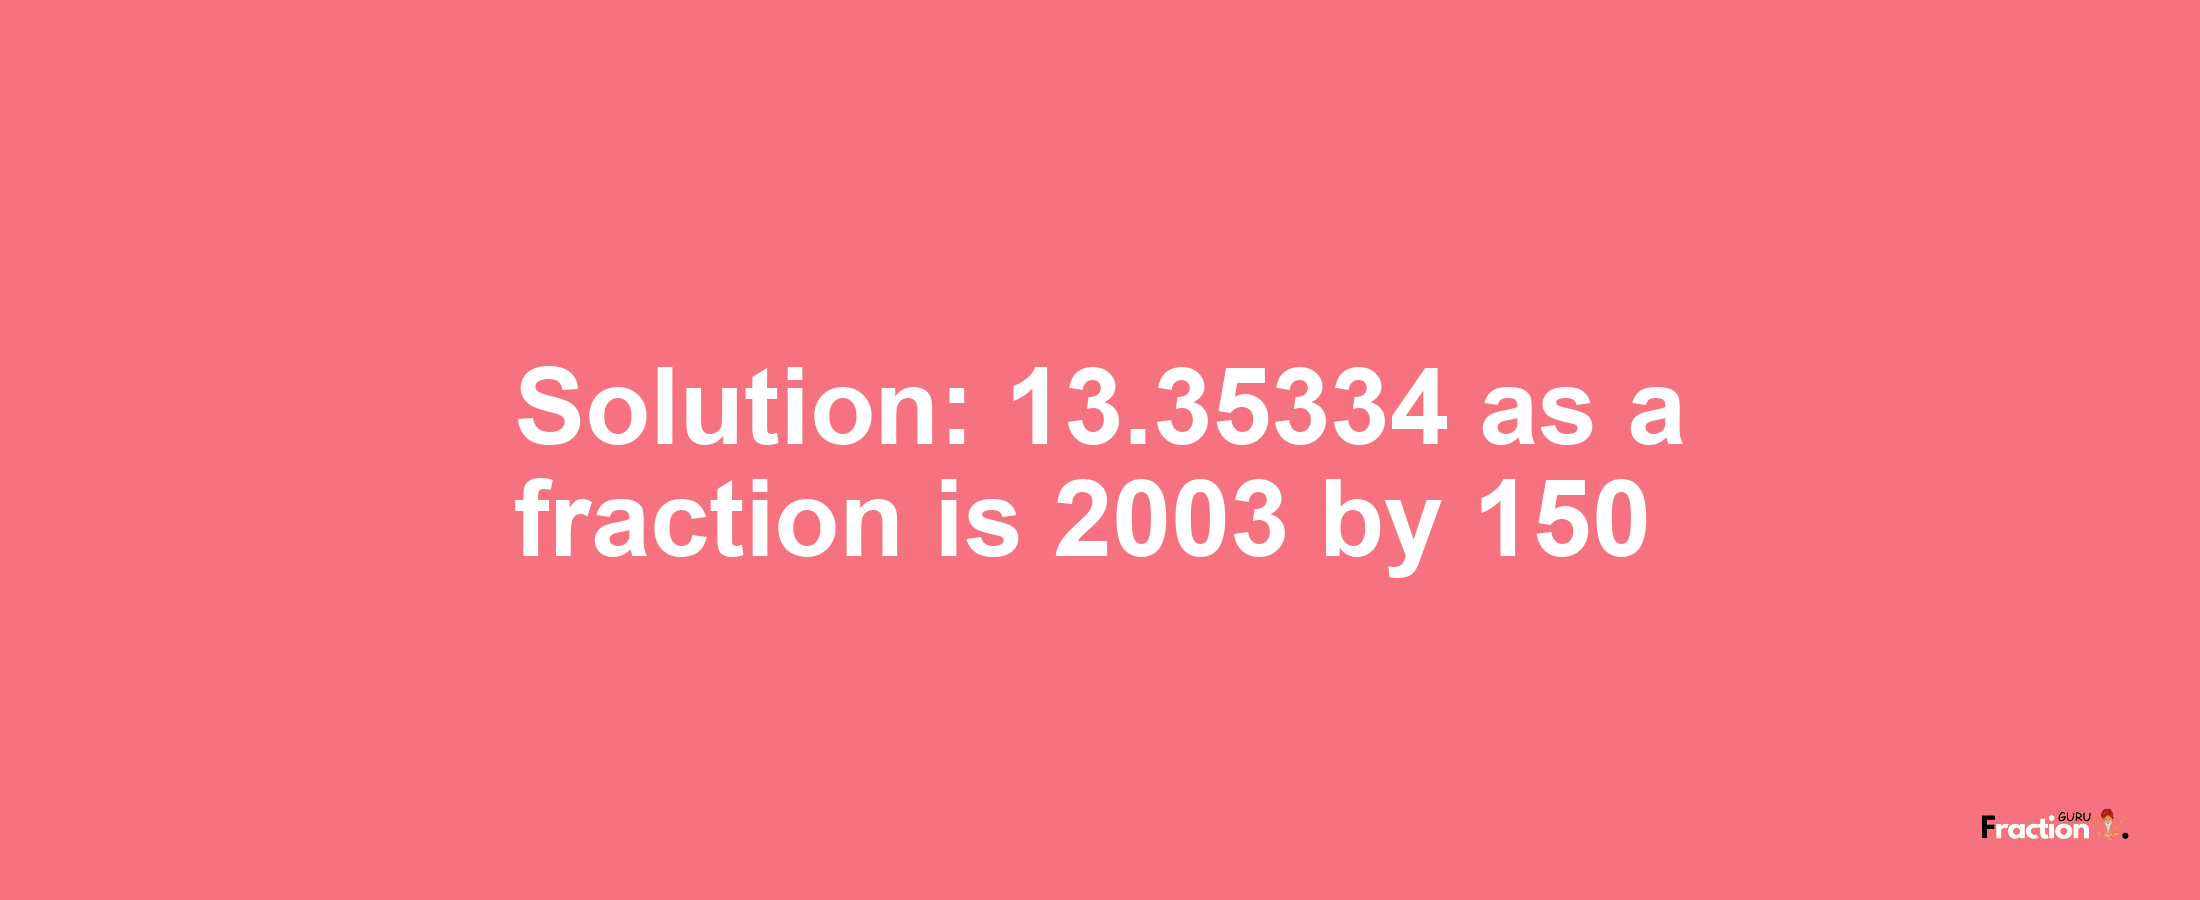 Solution:13.35334 as a fraction is 2003/150